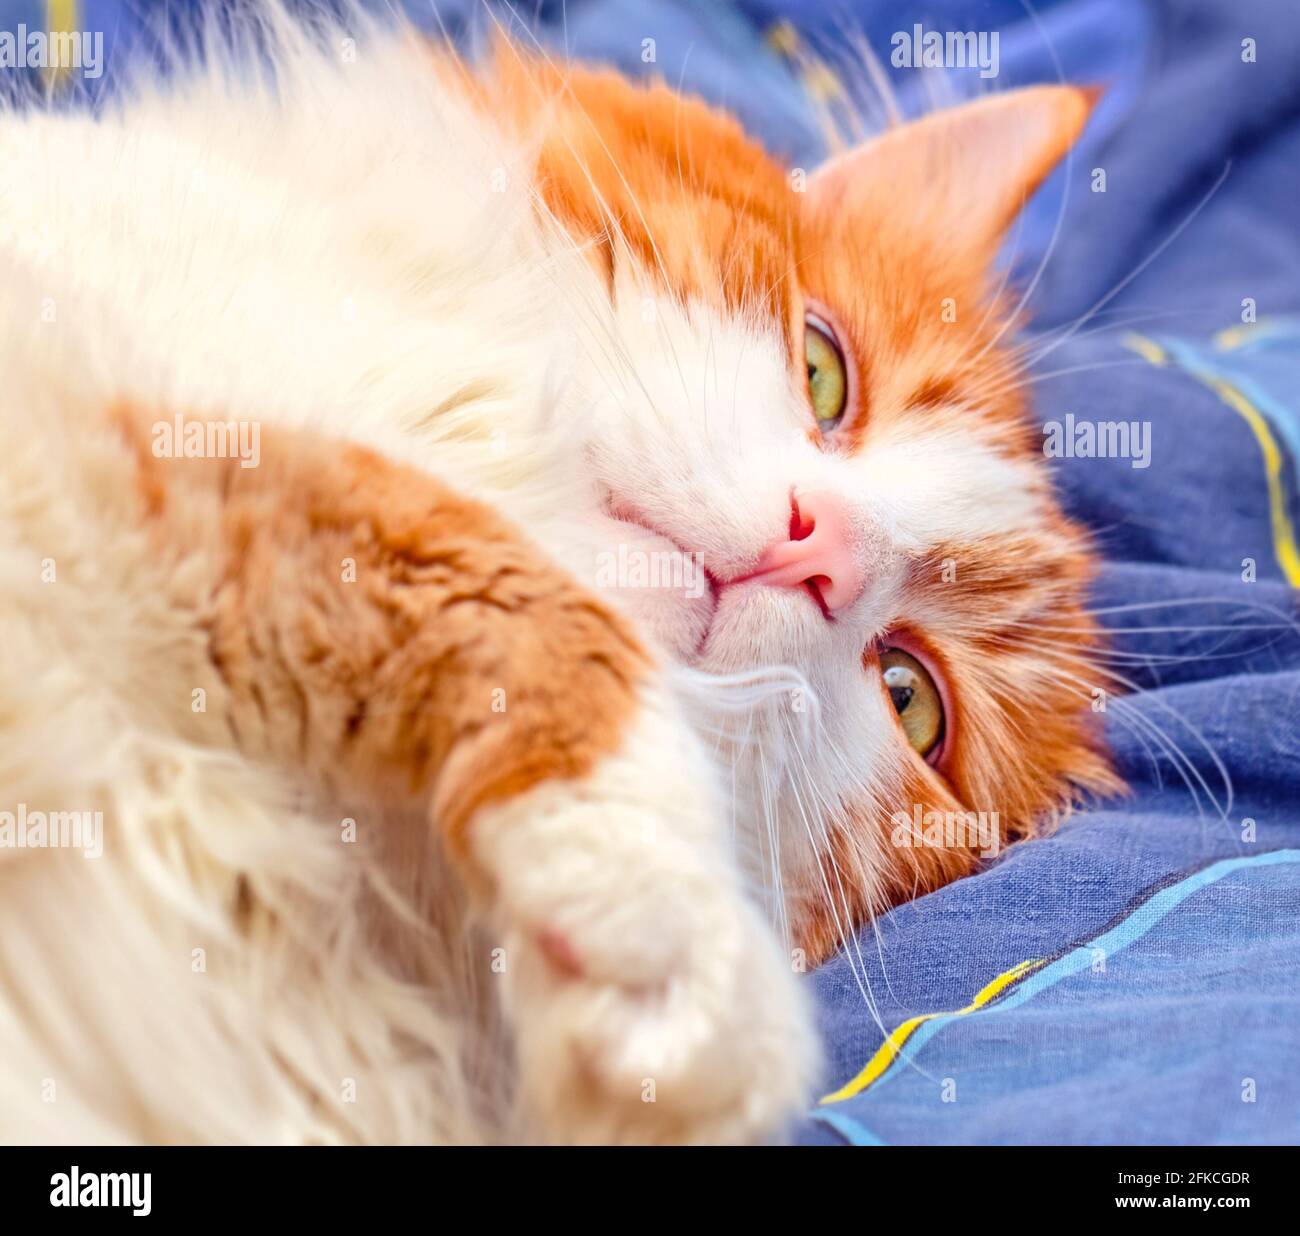 Real adult portrait of charming red cat in nirvana at blue bed Stock Photo